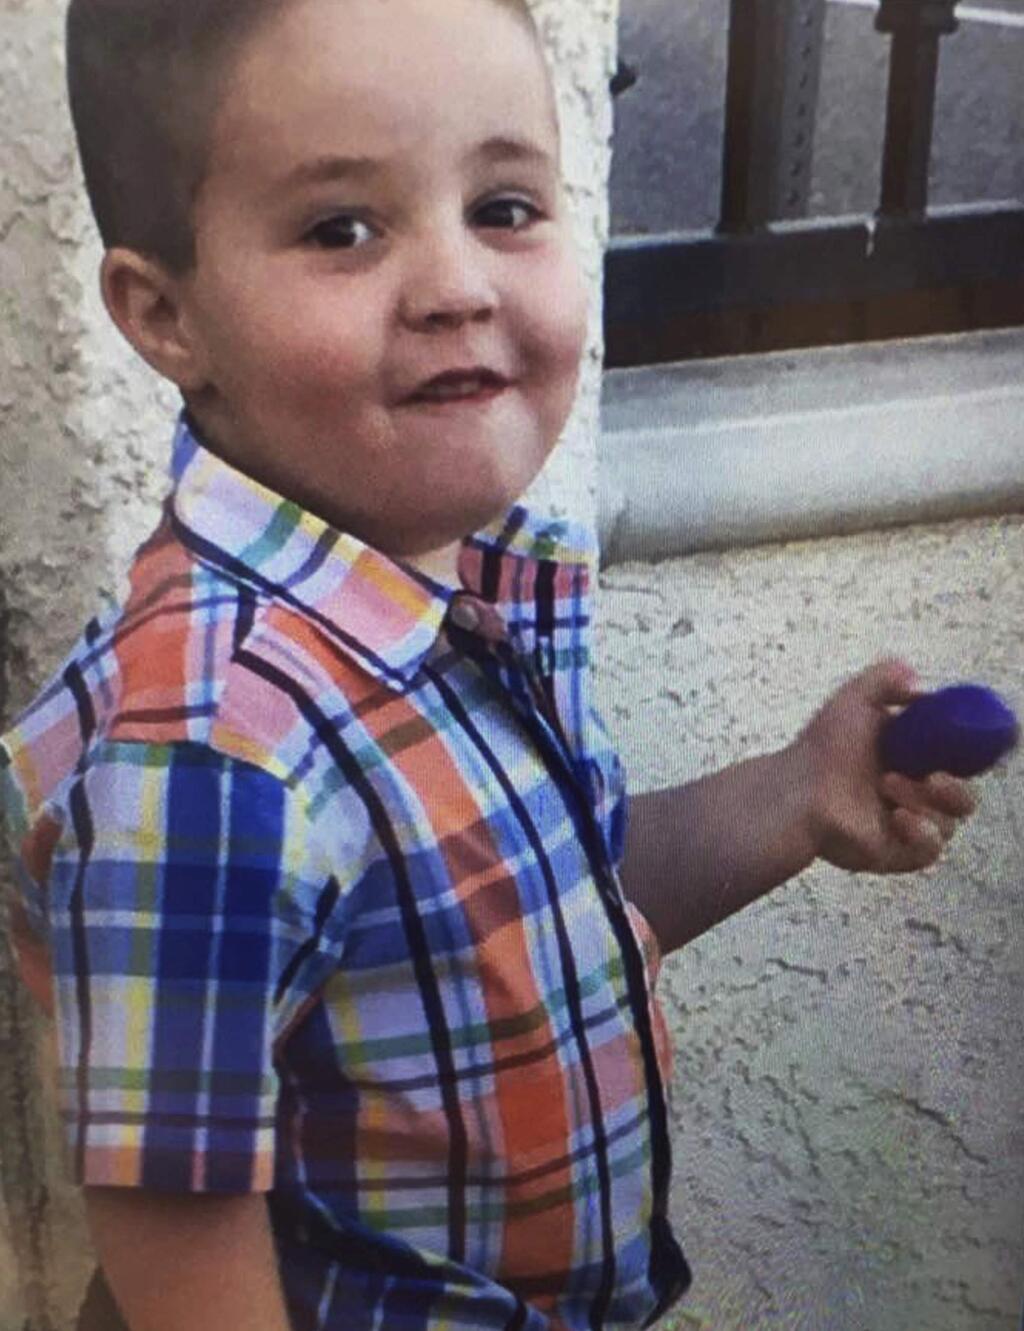 This undated photo posted on the South Pasadena, Calif., Police Department's Facebook page shows Aramazd Andressian, Jr., as they seek the public's help in locating him. Authorities throughout Los Angeles County are searching for the 5-year-old, reported missing after paramedics found his father passed out in a park. Police in South Pasadena say the boy's mother reported Saturday, April 22, 2017, that her estranged husband had failed to drop the boy off at a pre-arranged meeting place. (South Pasadena Police Department via AP)